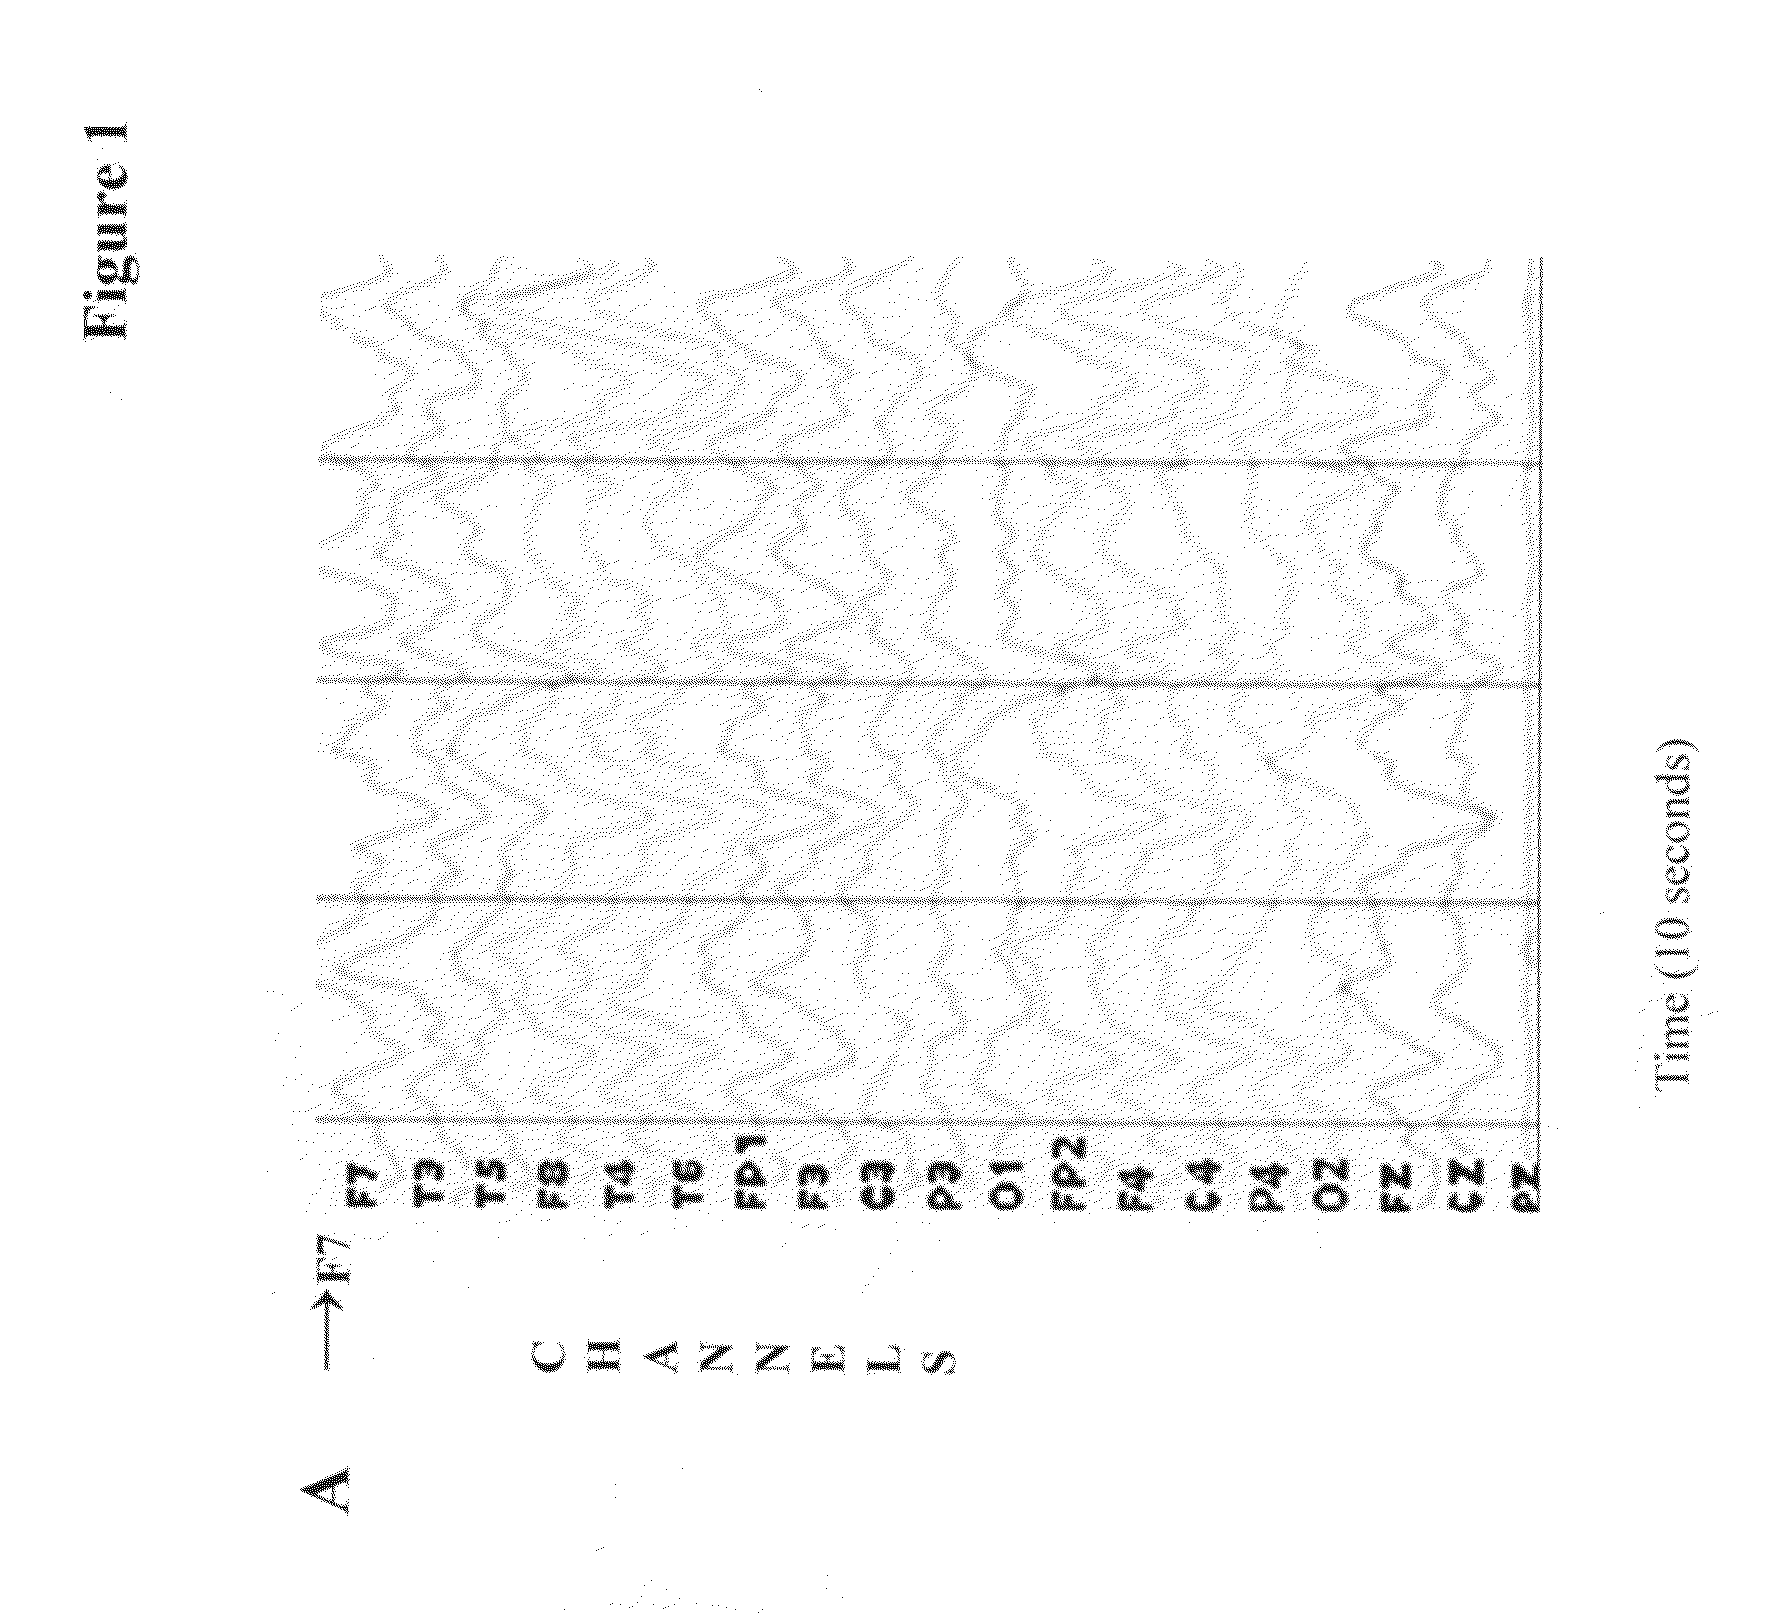 Methods based on fluctuations in cortical synchronization